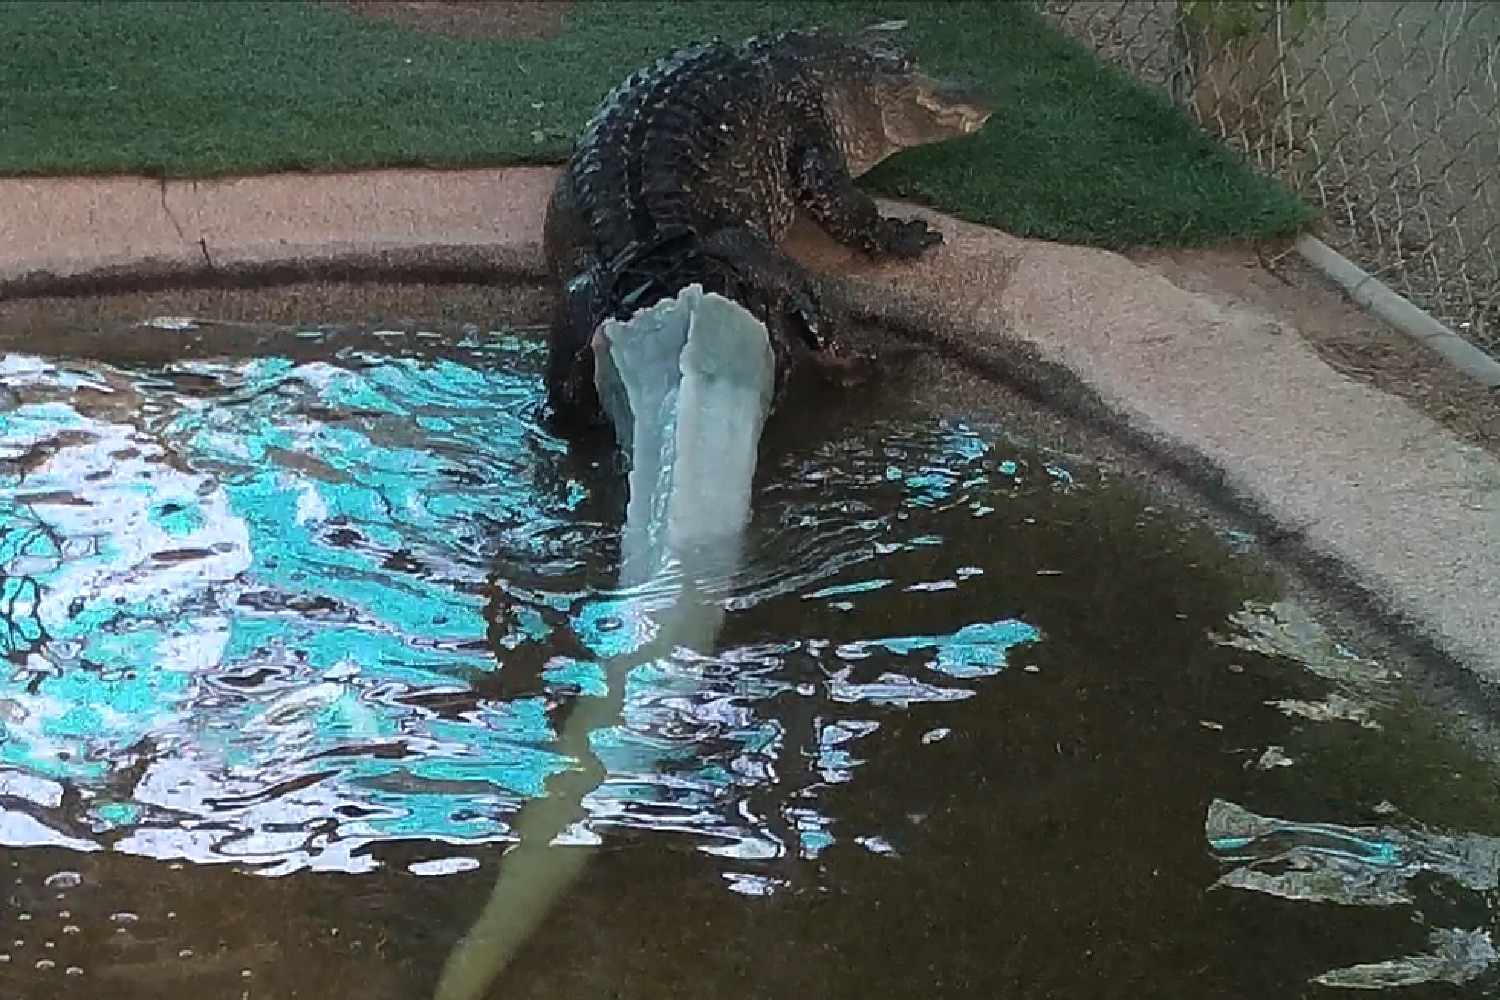 3d printed alligator tail climbing out of pond